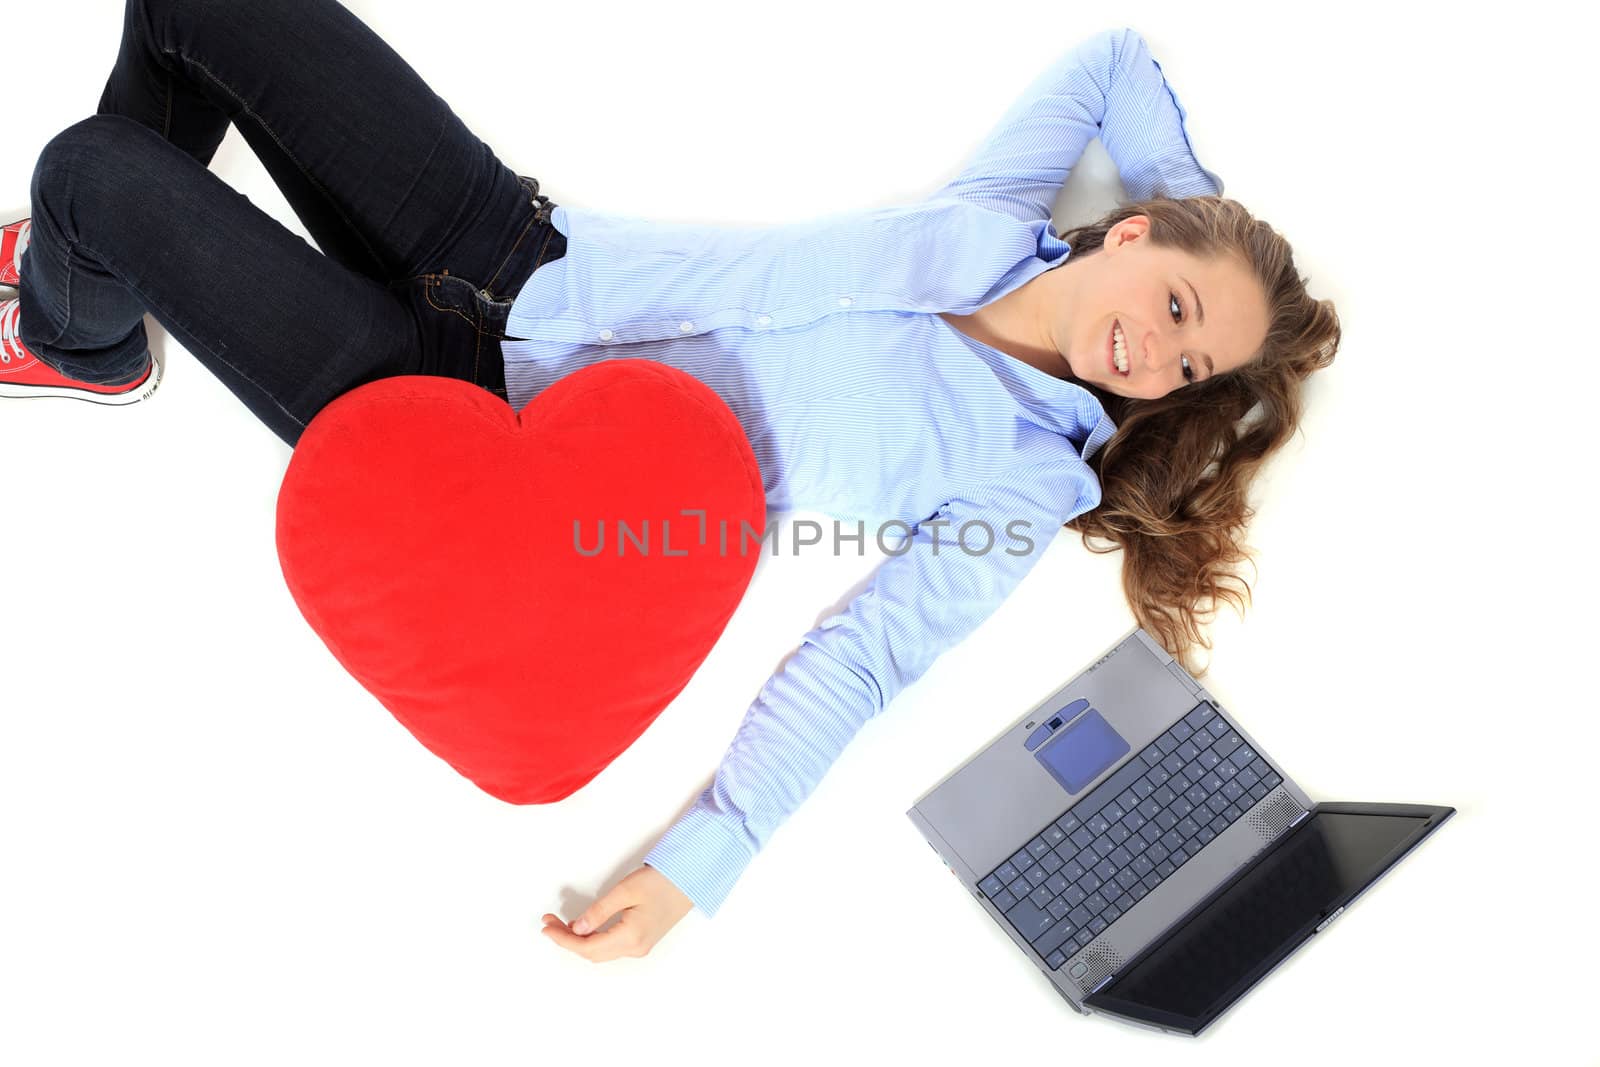 Attractive young girl lying next to her notebook computer holding a heart-shaped pillow. All on white background.